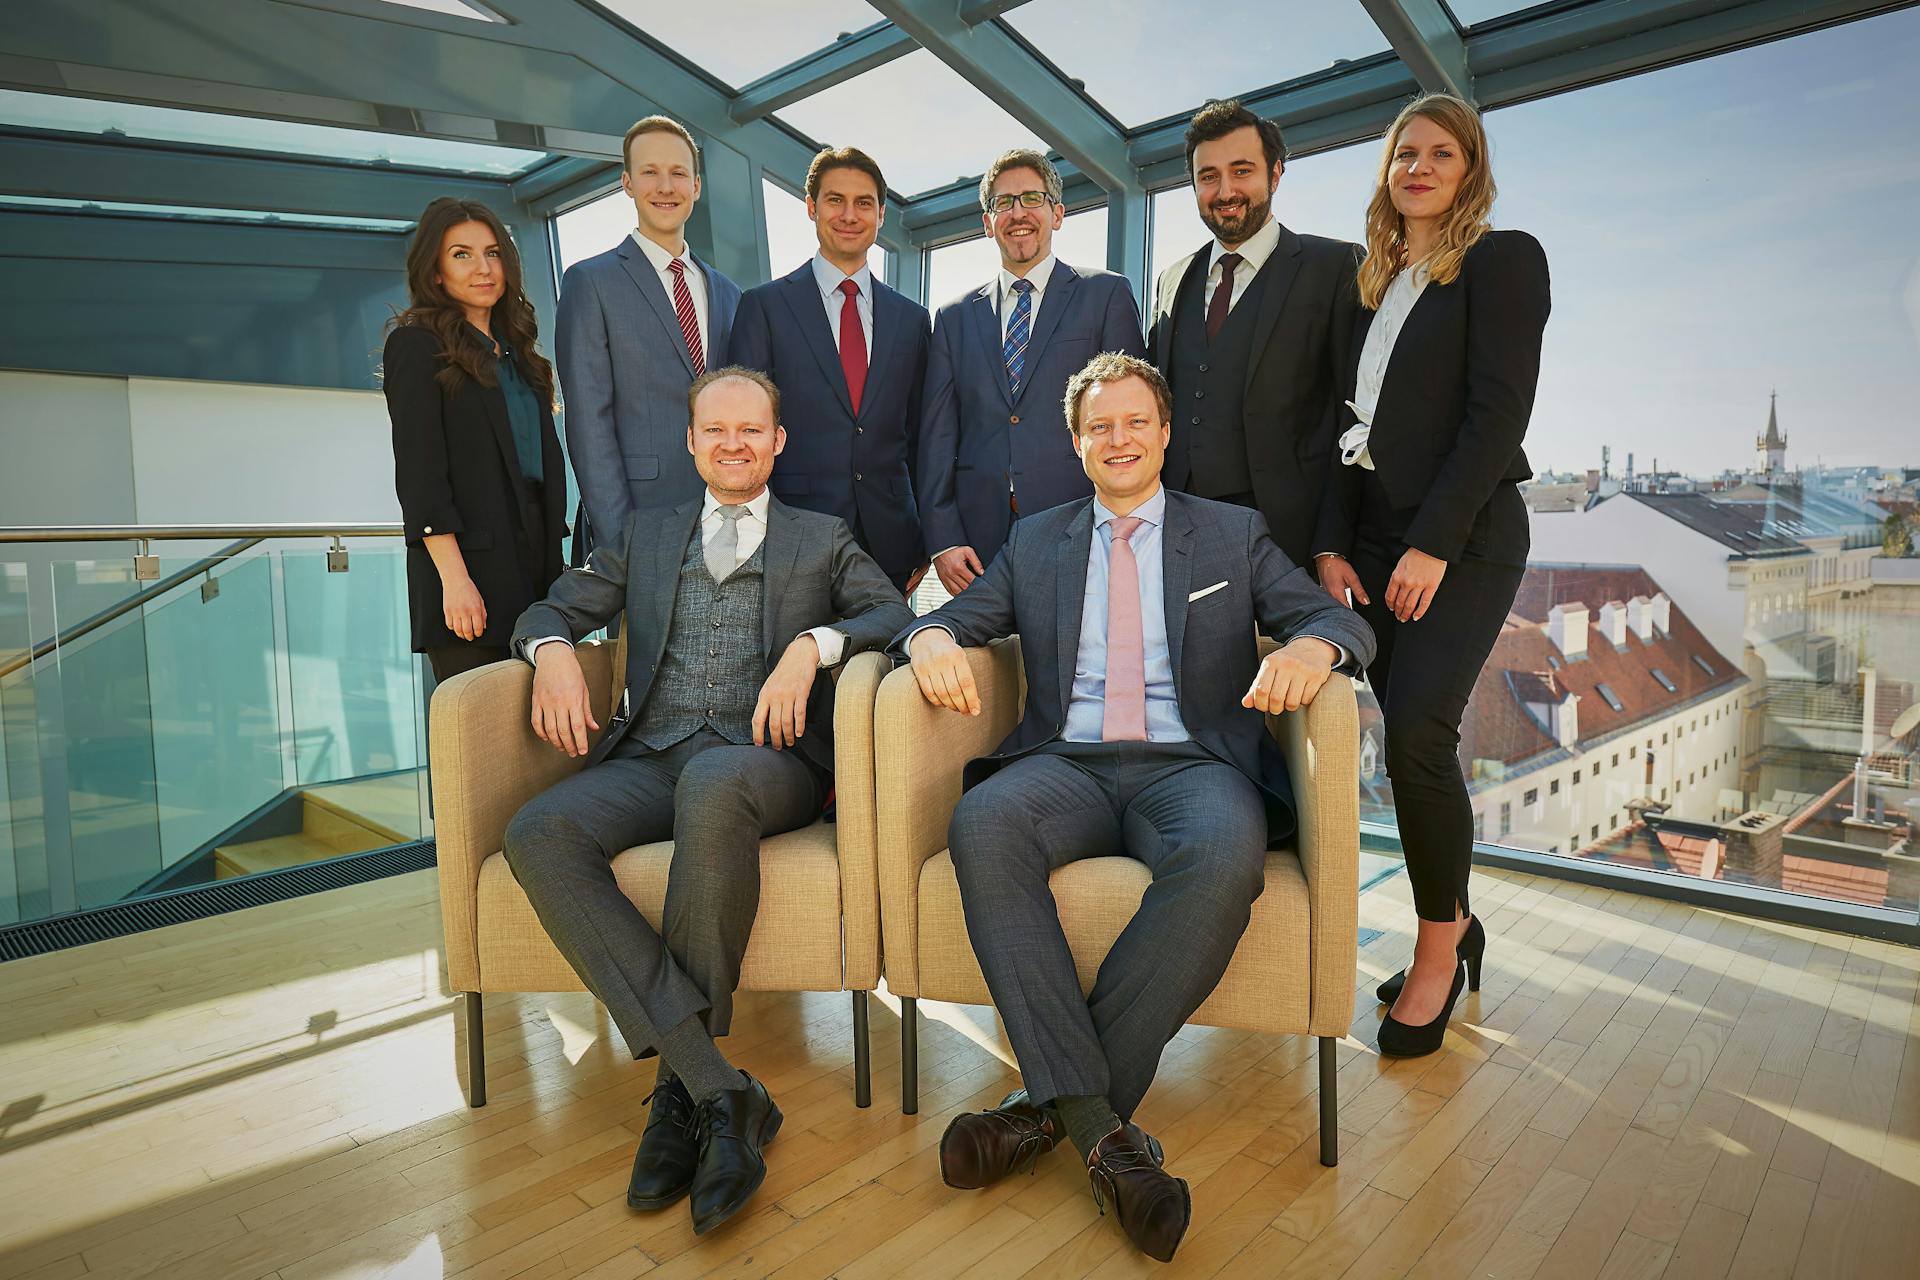 Expansion at Stadler Völkel Attorneys at Law with two new partners